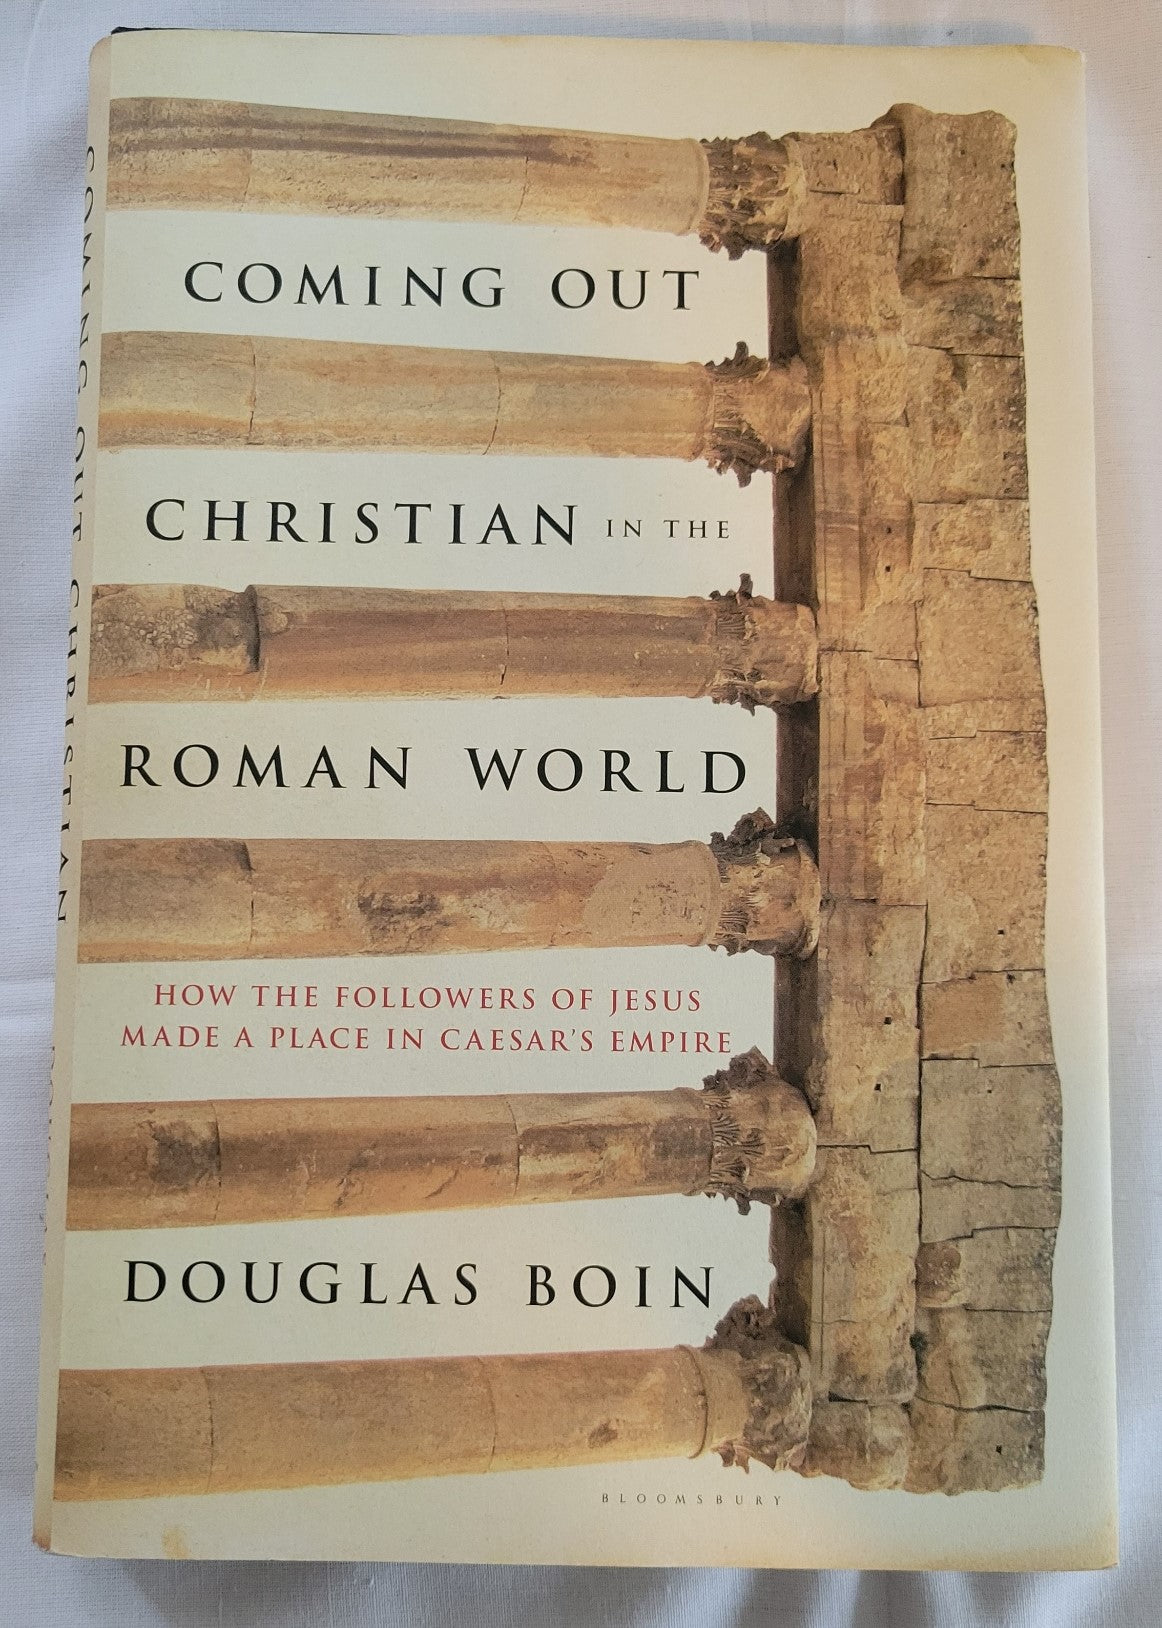 Used book Coming Out Christian in the Roman World written by Douglas Boin.  View of front cover.